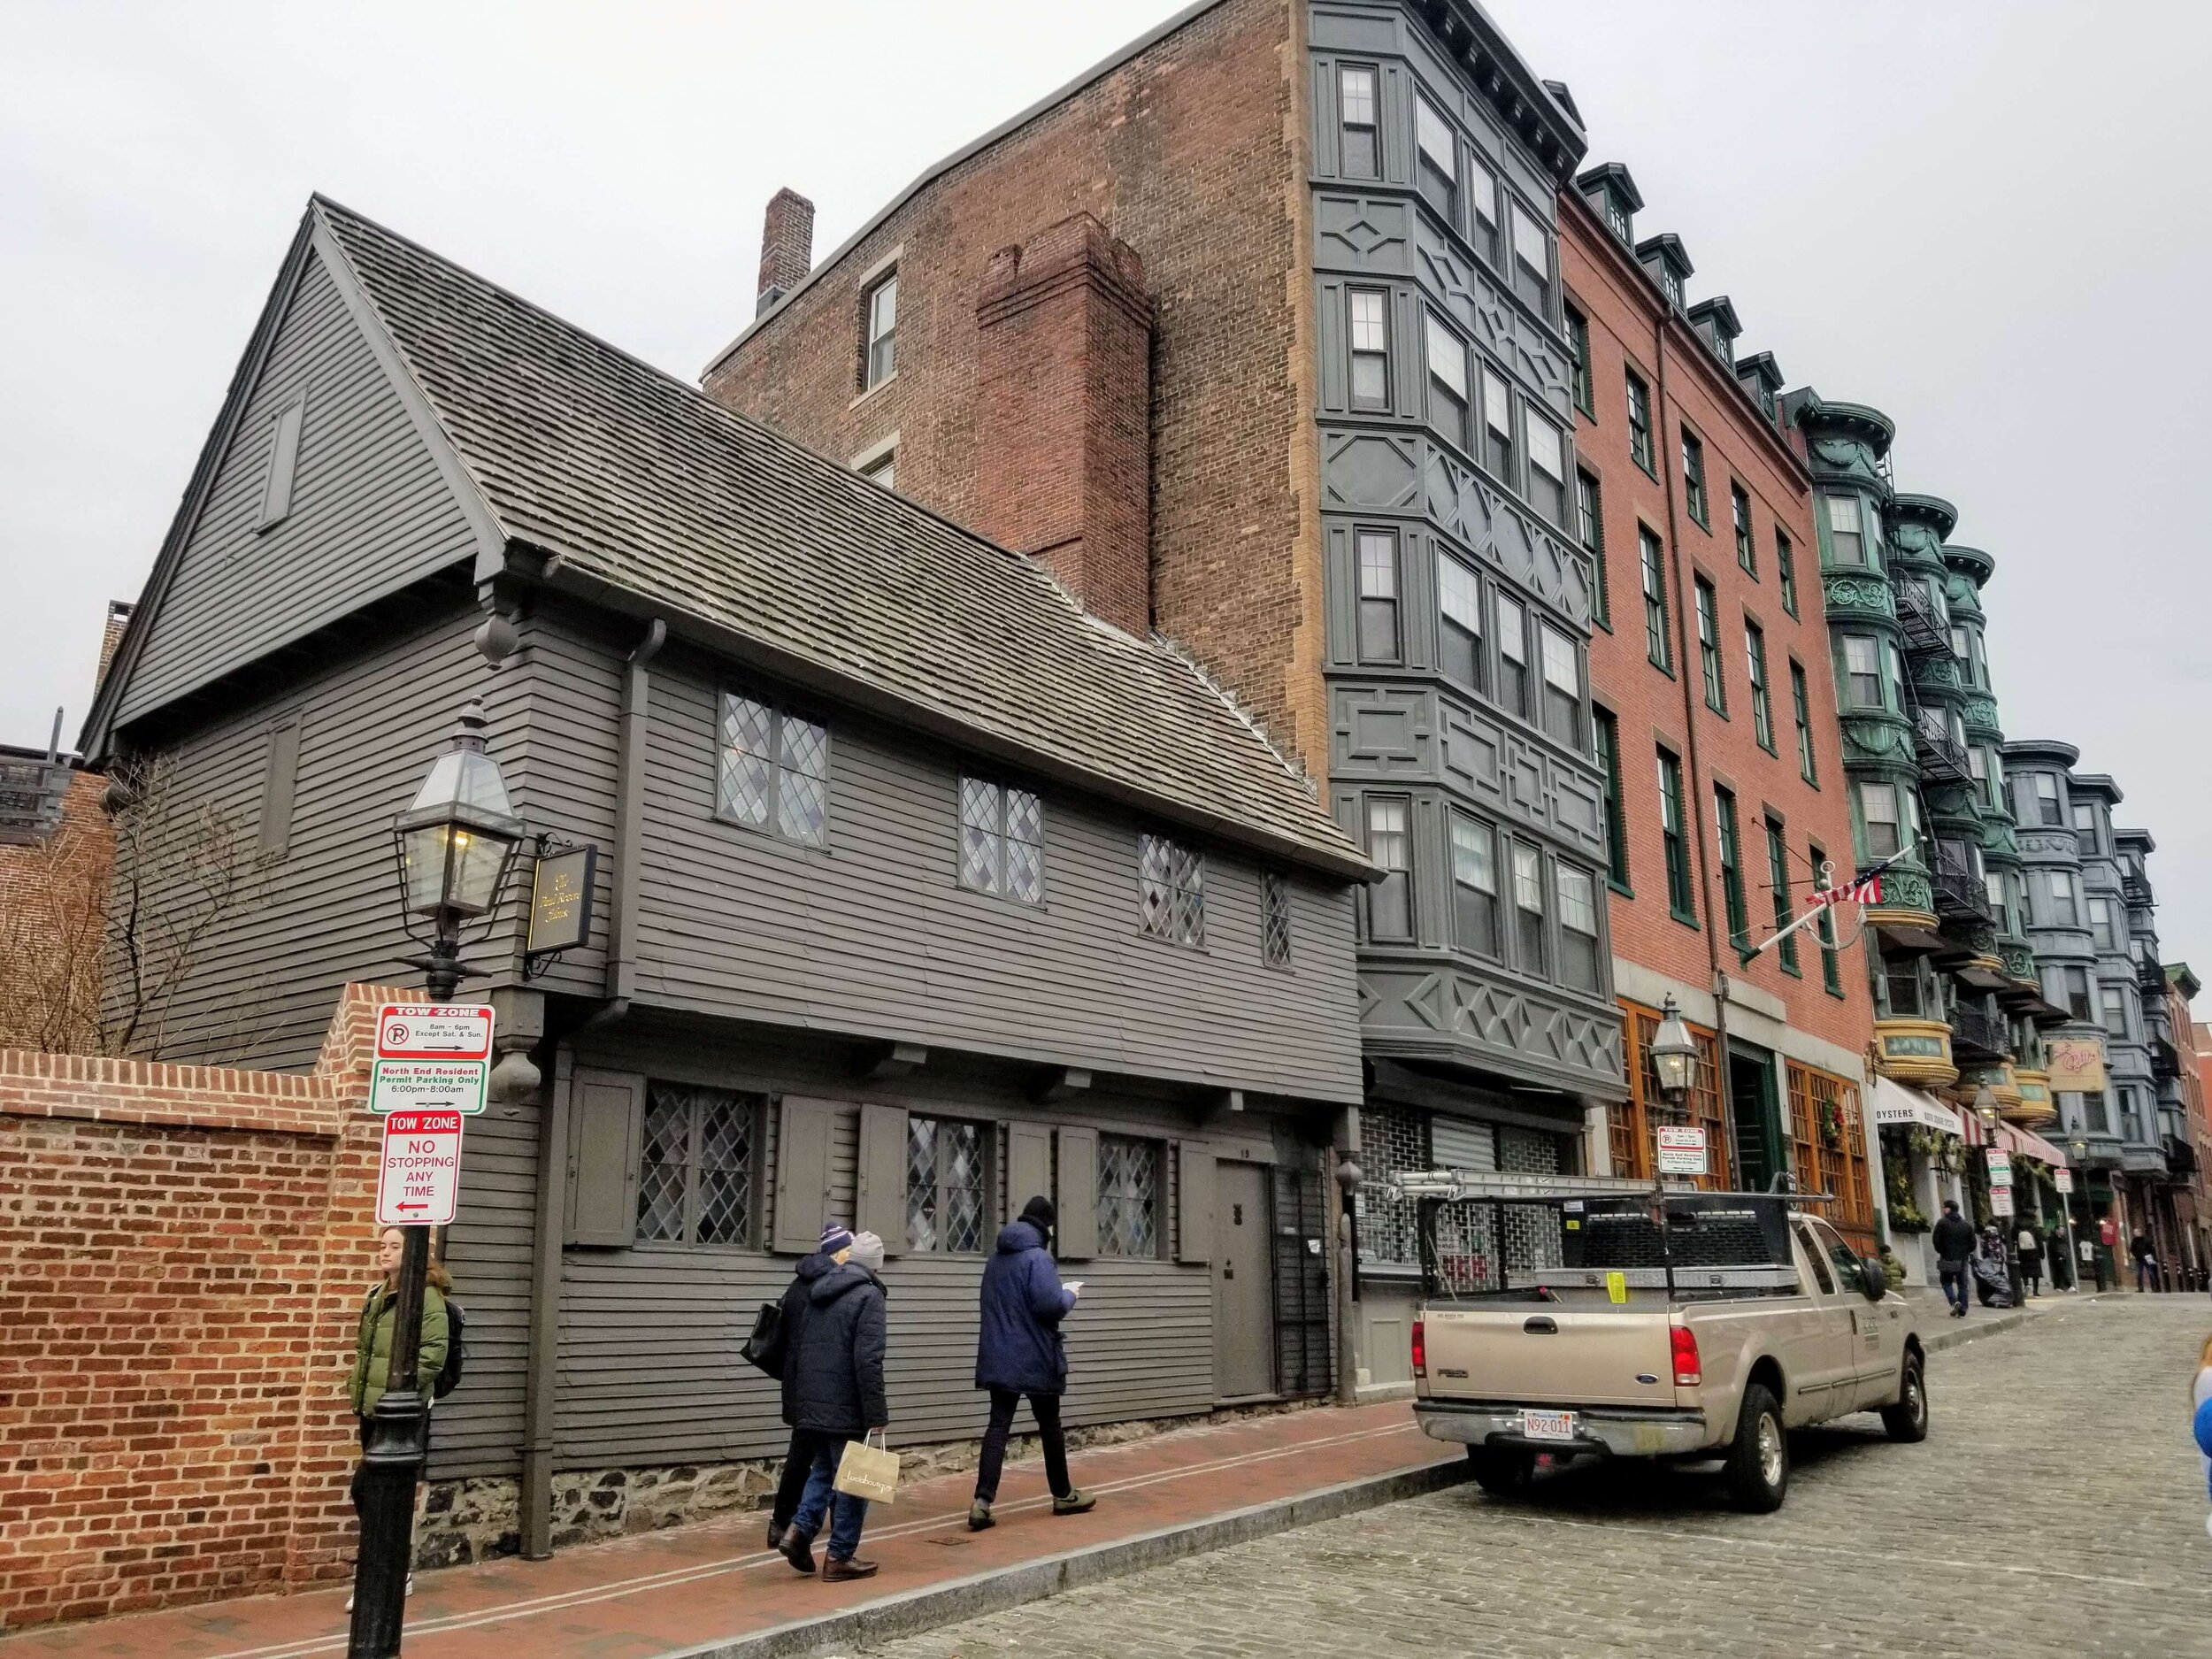  Paul Revere House- look for the brick Freedom Trail in the sidewalk right by the house, it looks line a line in the sidewalk in the picture. It made following the Freedom Trail so easy.  